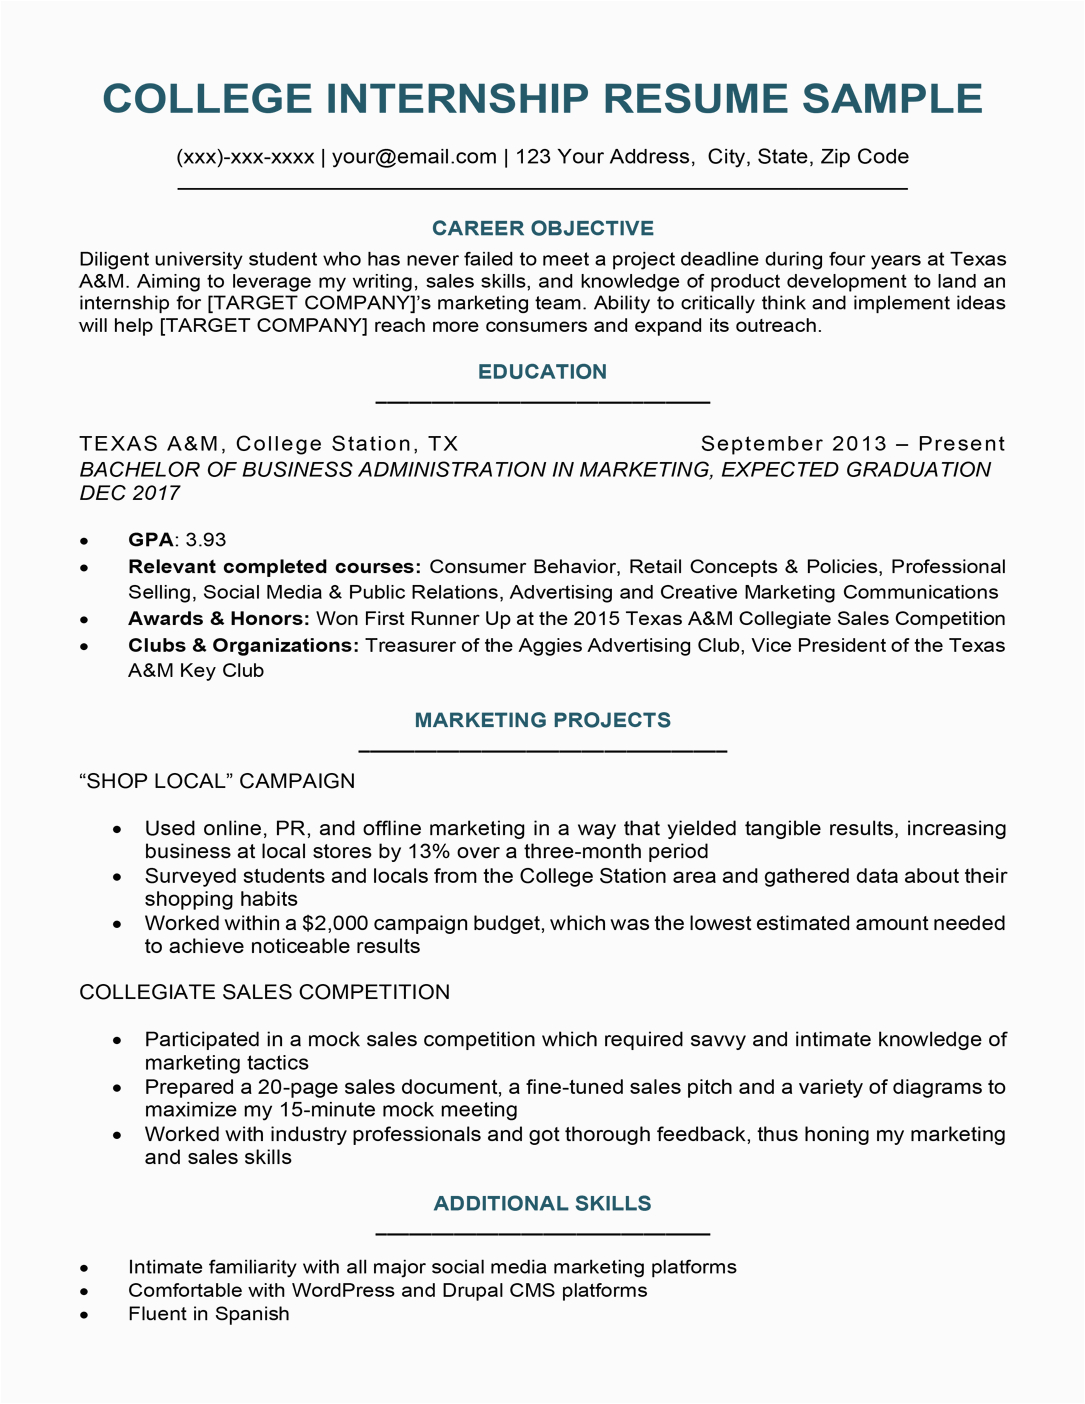 Sample Resume Skills for College Students College Student Resume Sample & Writing Tips